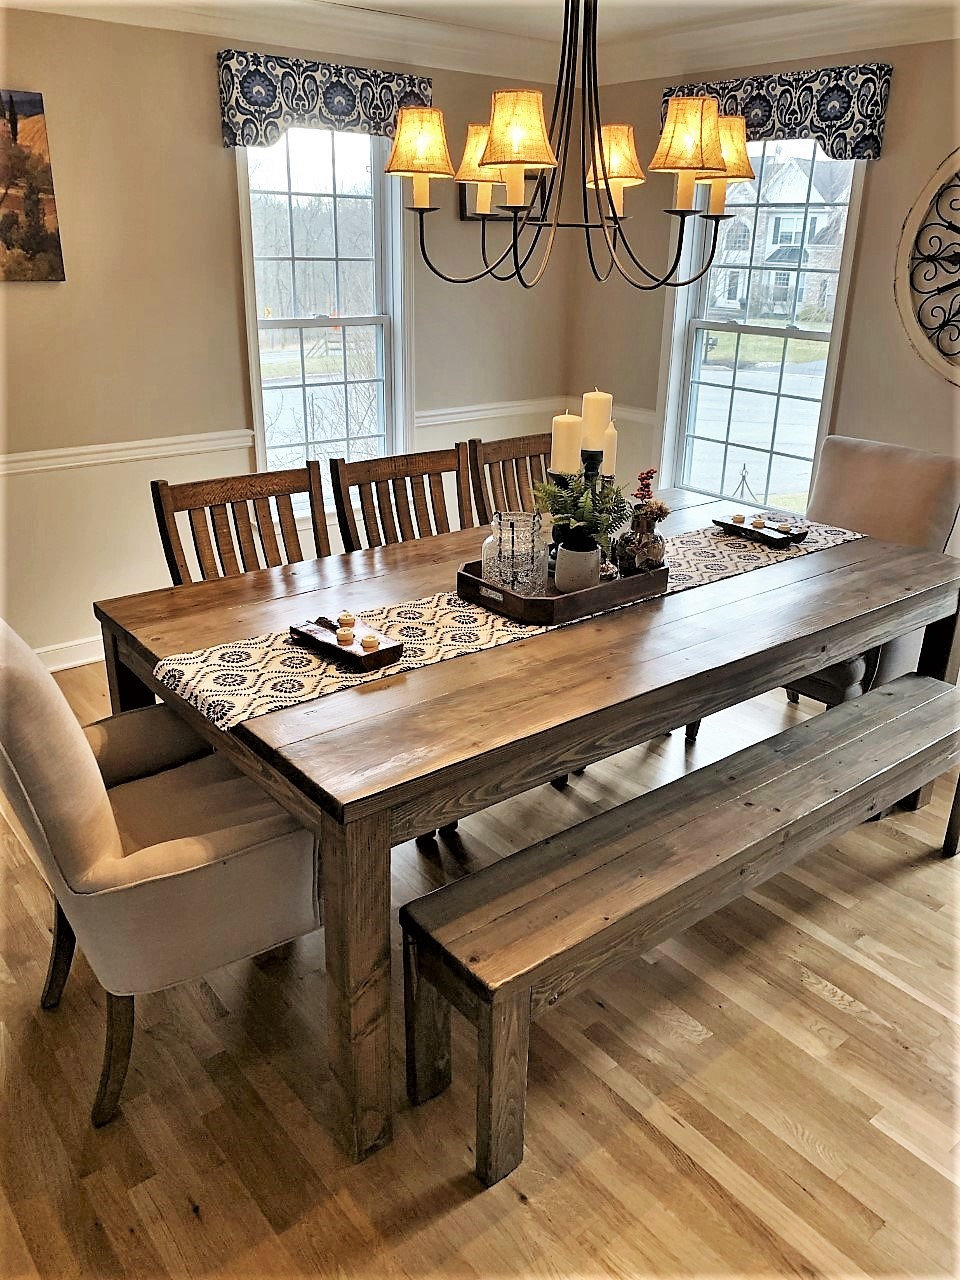 Rustic Farmhouse Dining Table, Rustic Round Table And Chairs